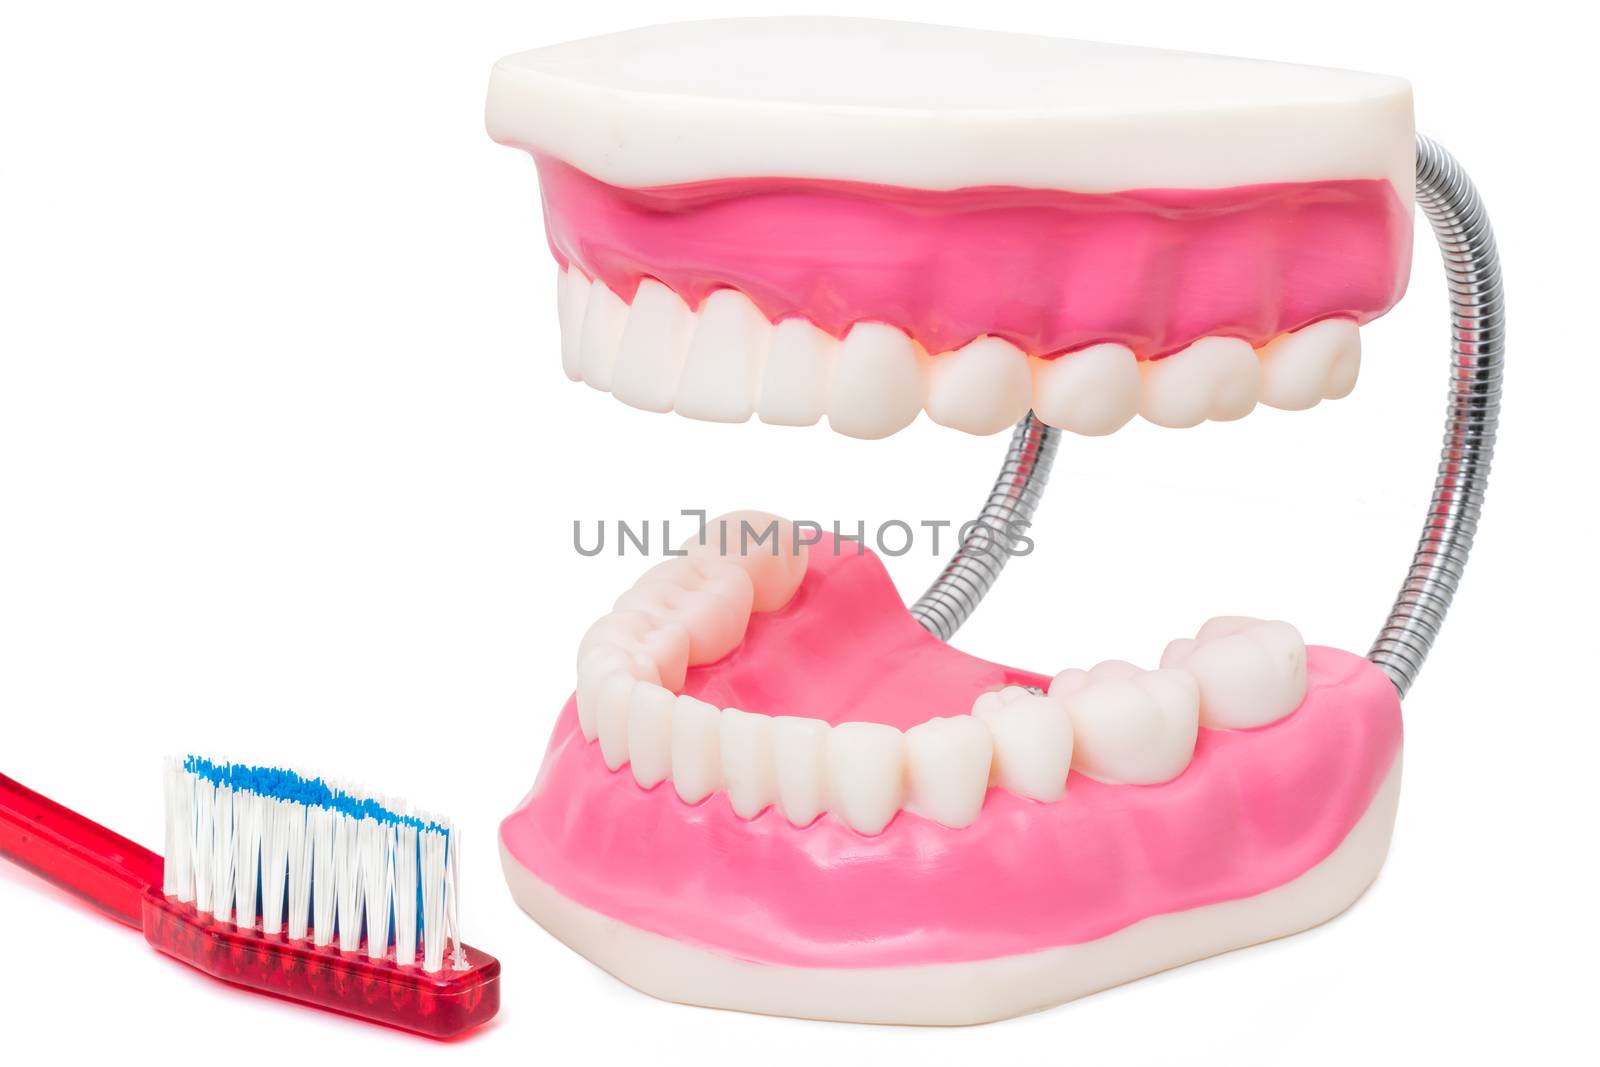 Macro close up still life of oversize human teeth prosthesis and toothbrush isolated on white background.